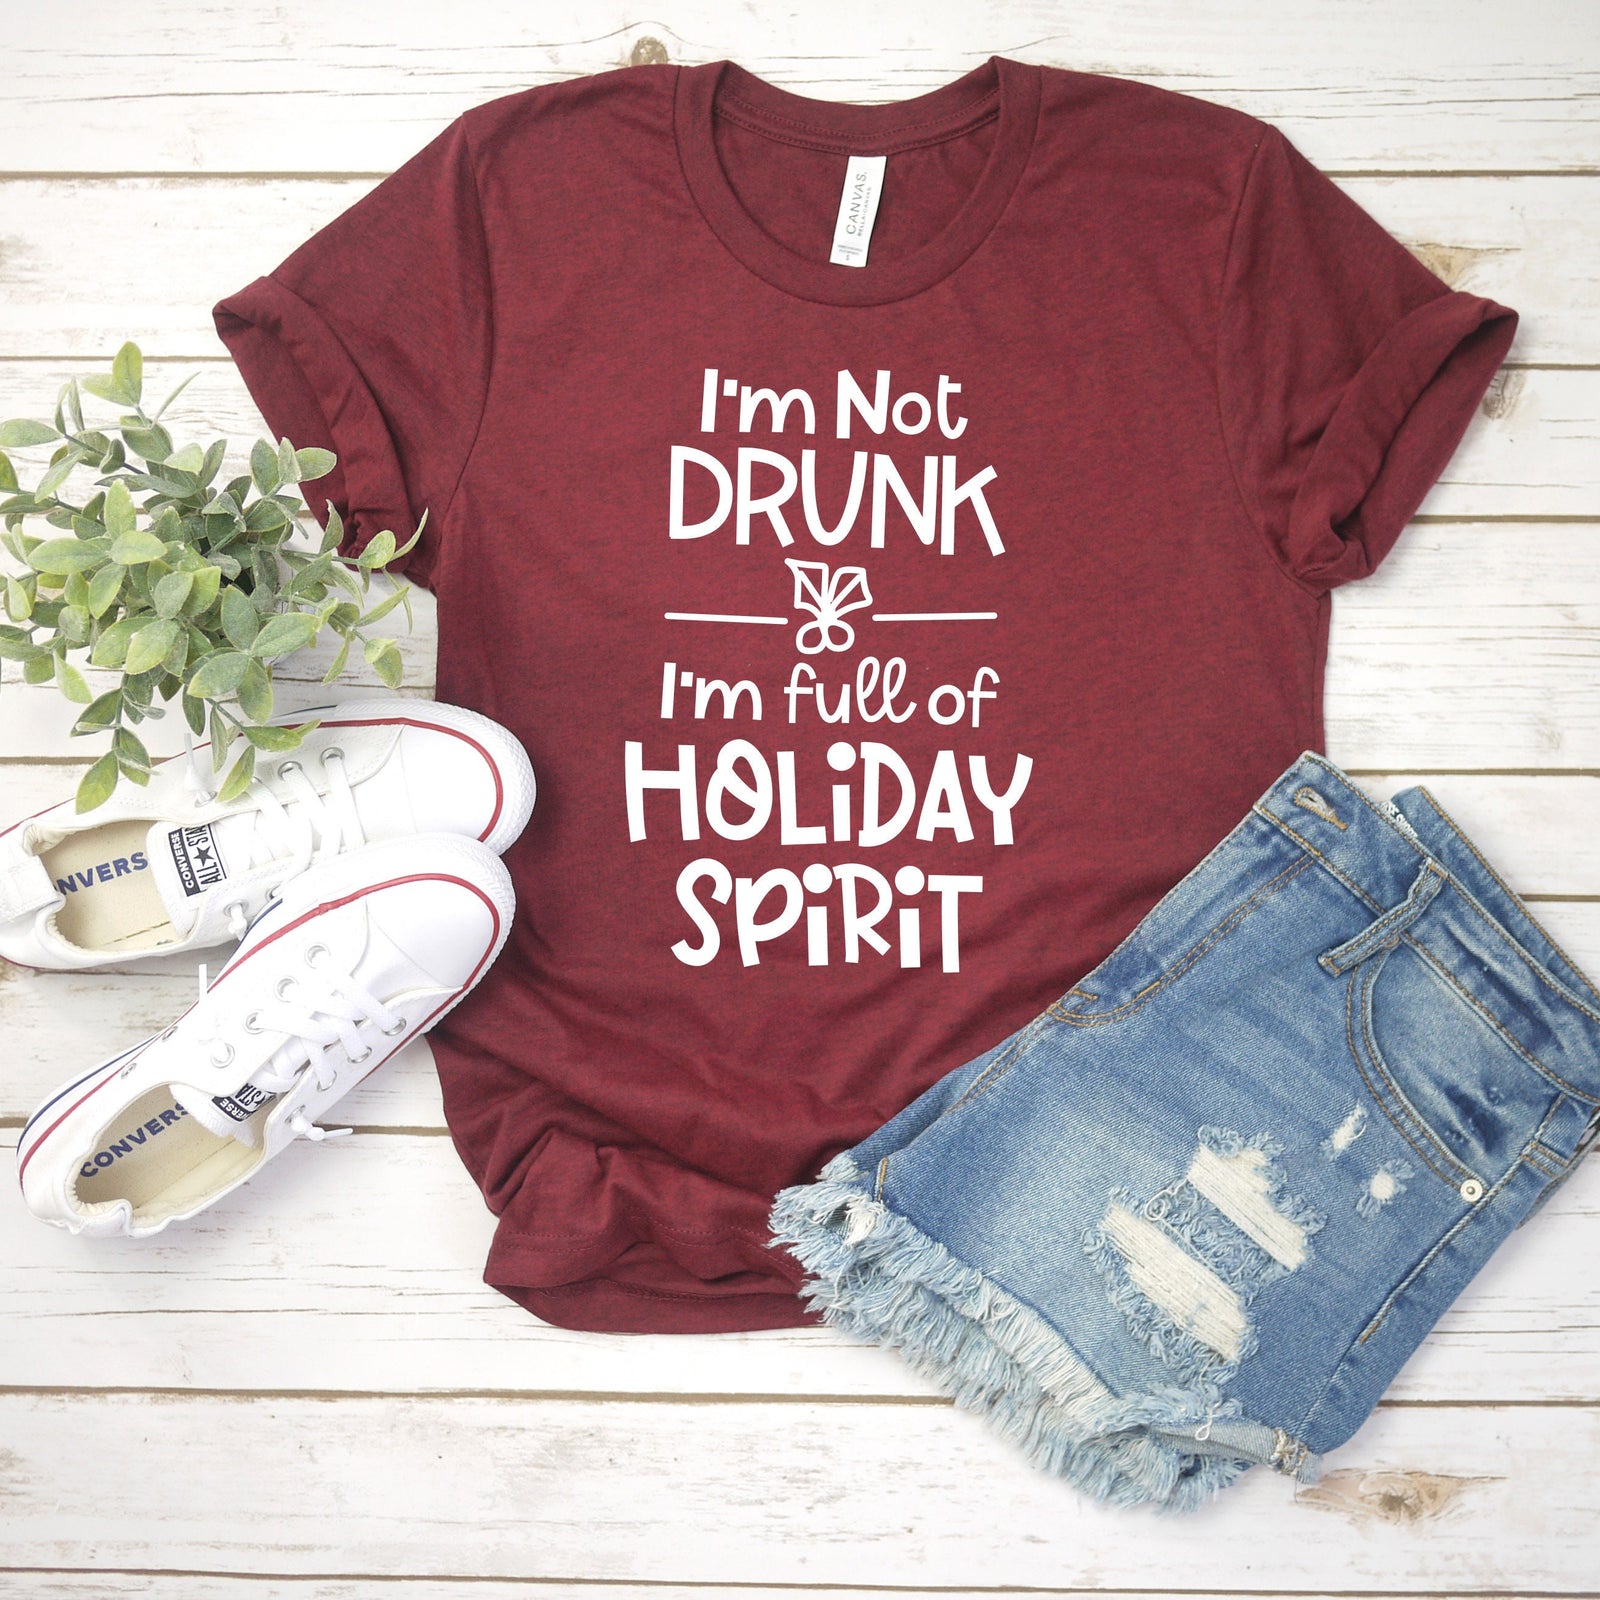 I'm not Drunk - I'm Full of Holiday Spirit Christmas T Shirt - Wine Lover T Shirt - Funny Christmas Party Matching Shirt Gift